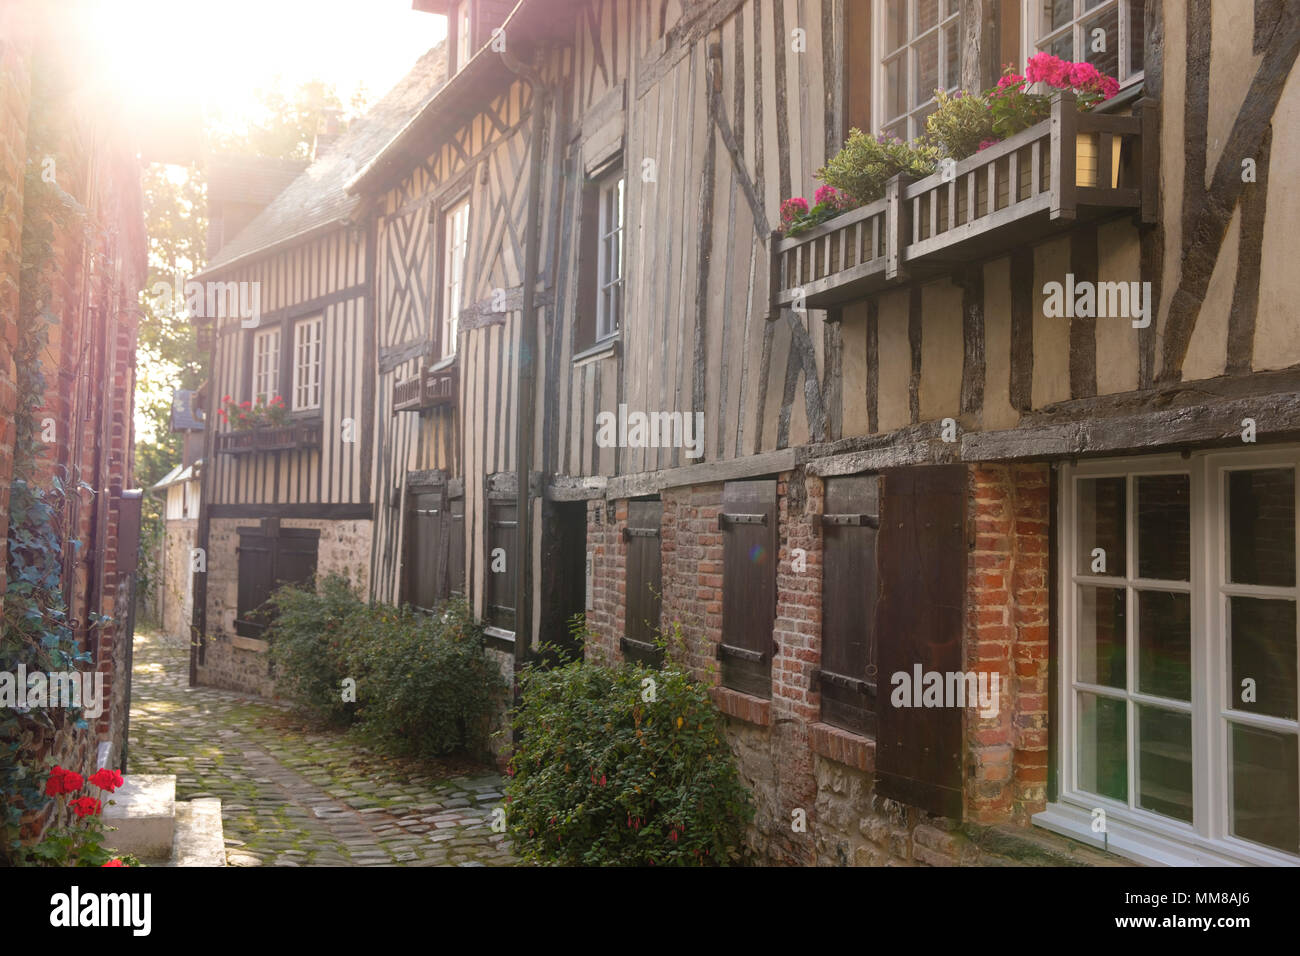 Half timbered homes in french village of Honfleur, Normandy, France, Europe Stock Photo